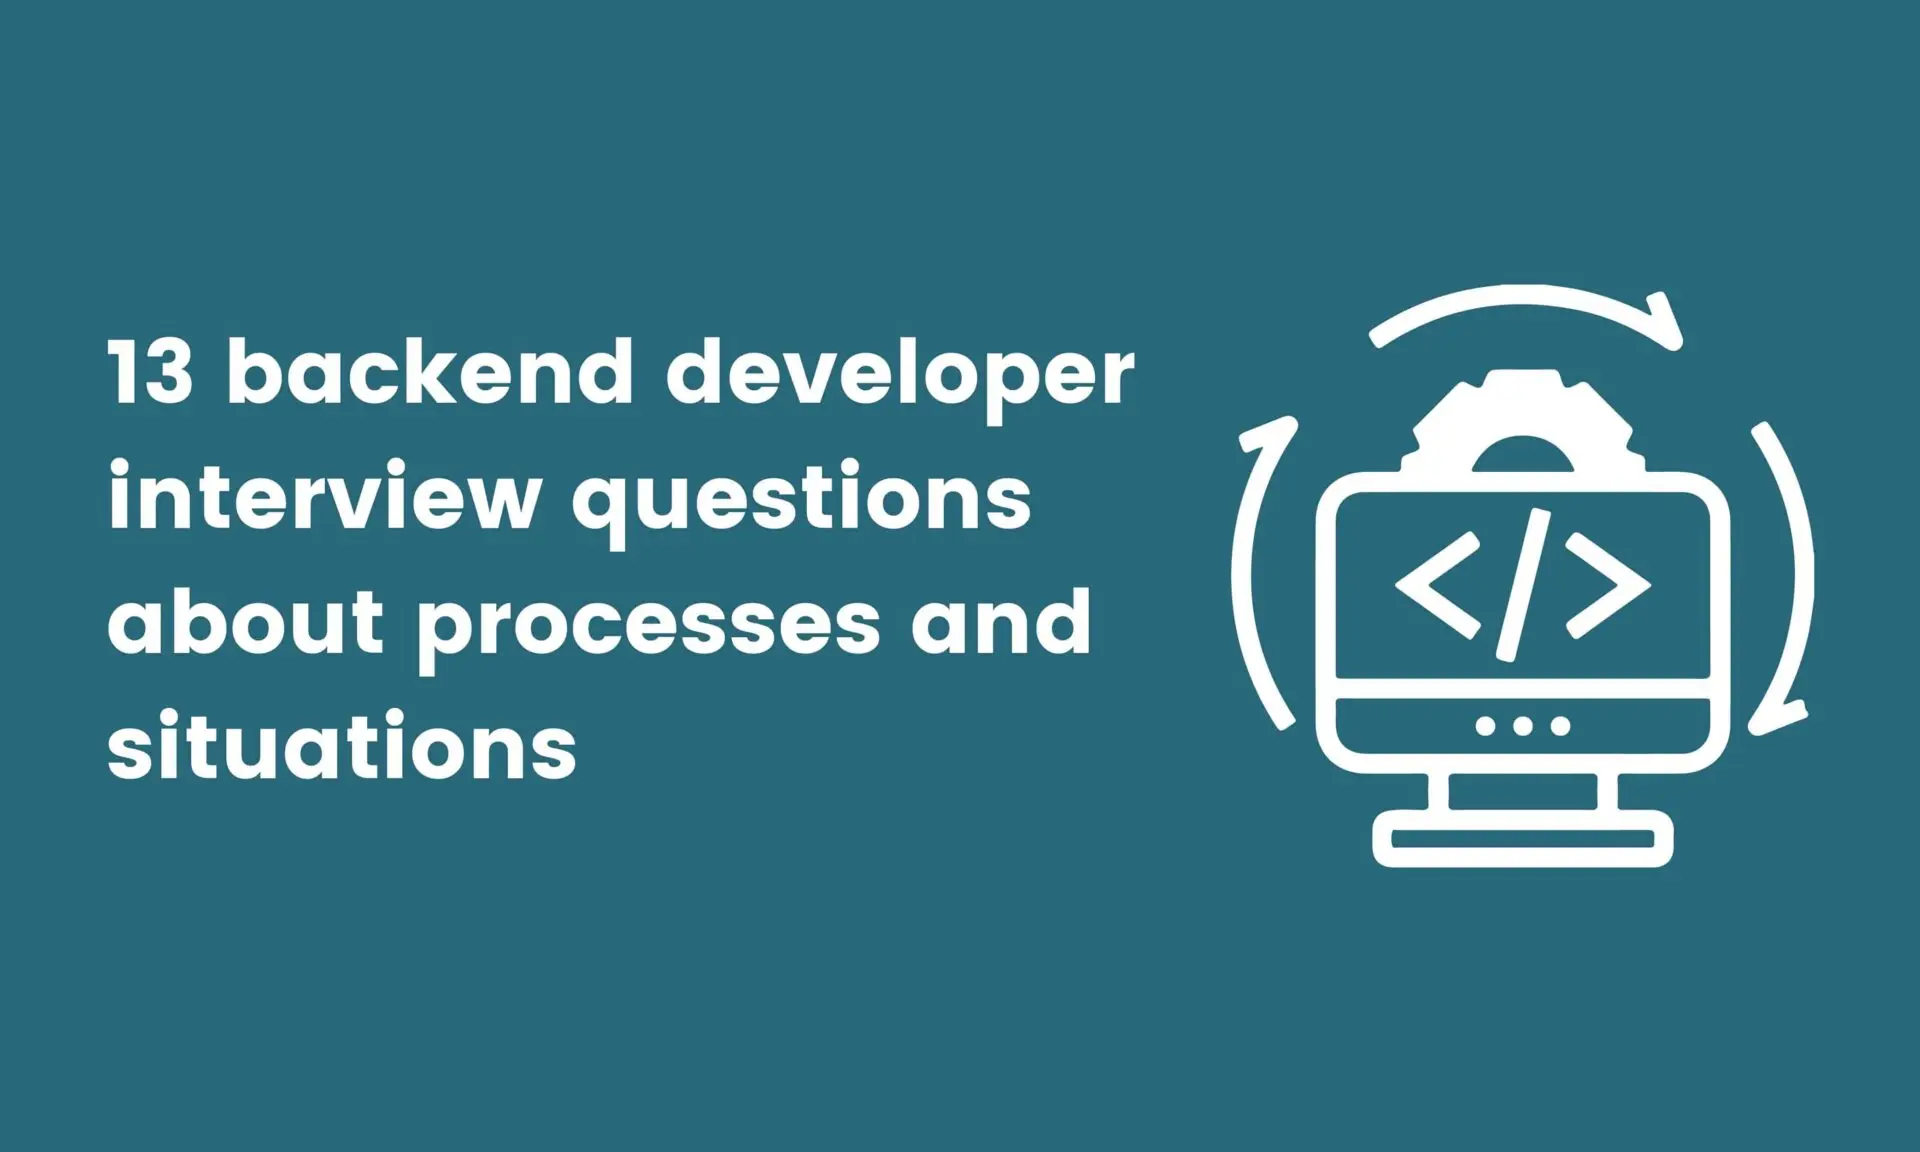 13 backend developer interview questions about processes and situations